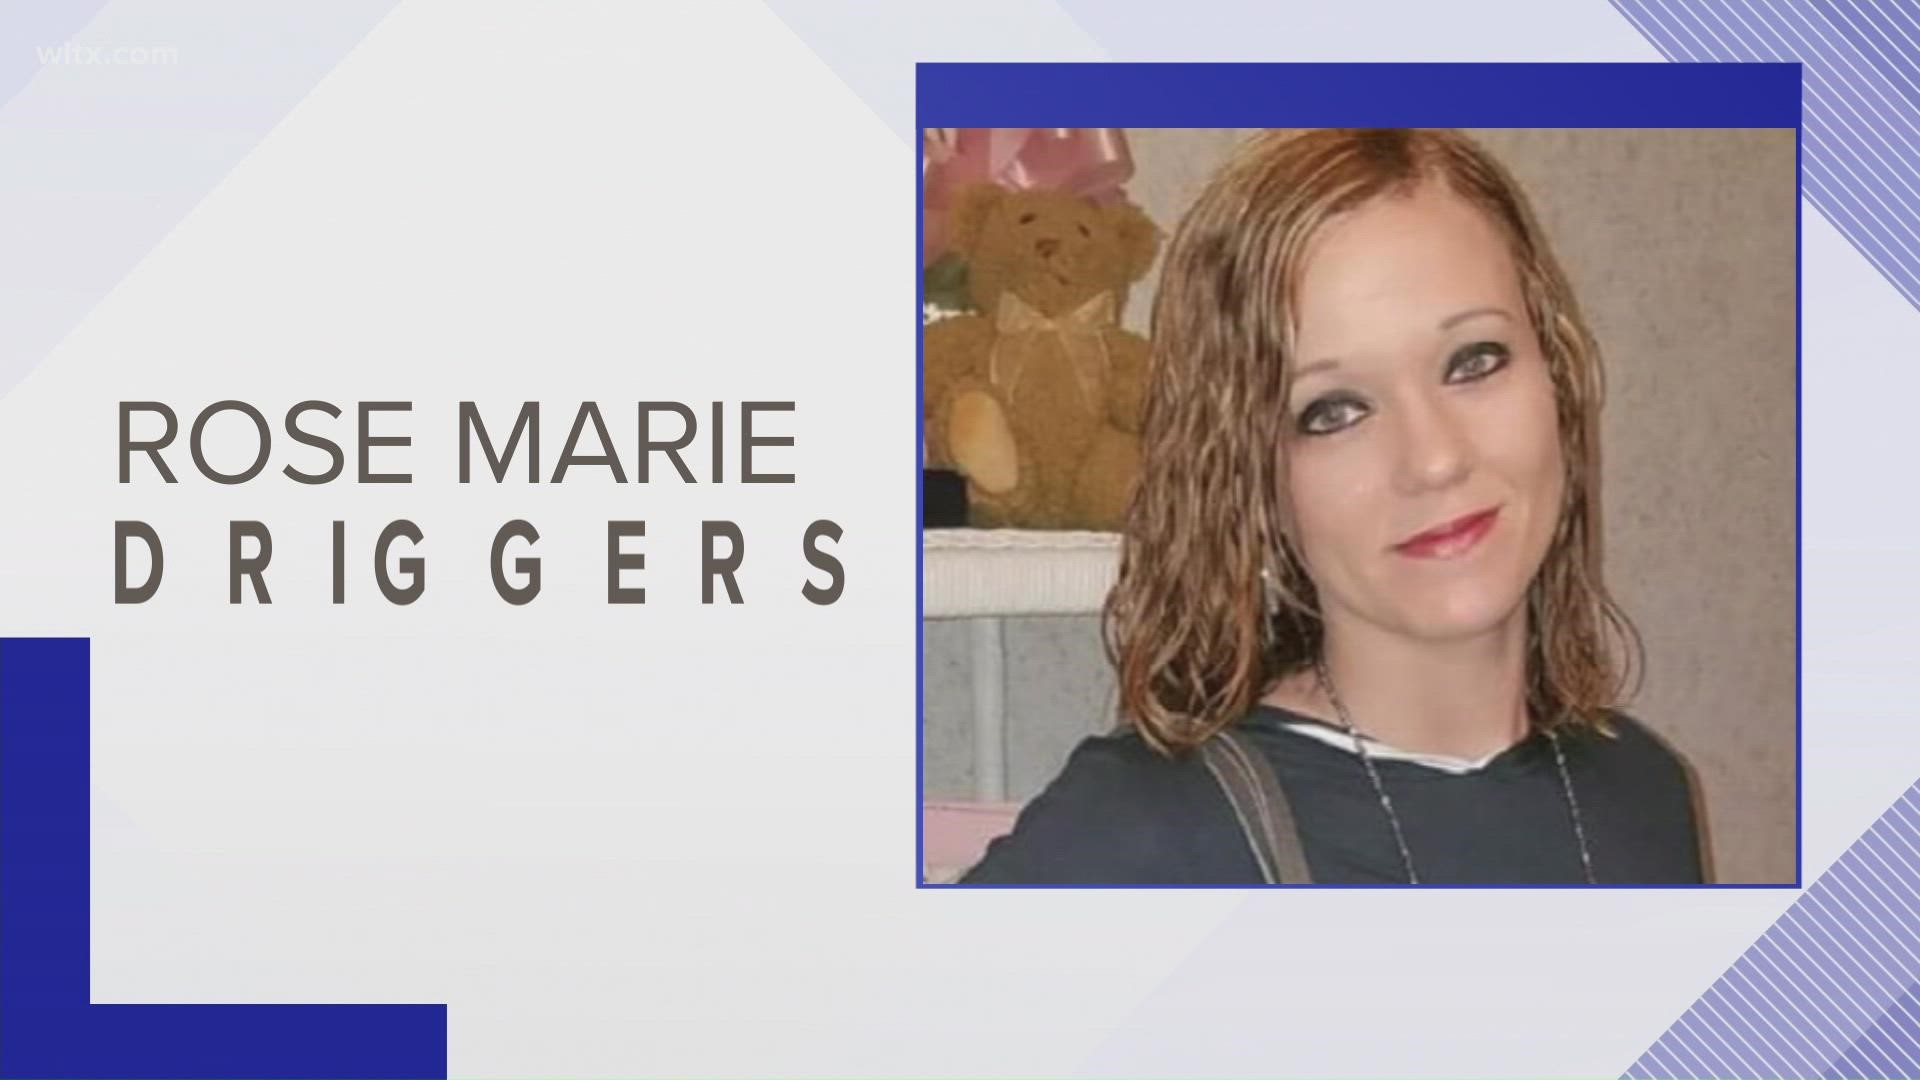 The Sumter County Sheriff's Office say it has identified a man they would like to question after the body of Rose Marie Driggers was found along a Sumter County Rd.